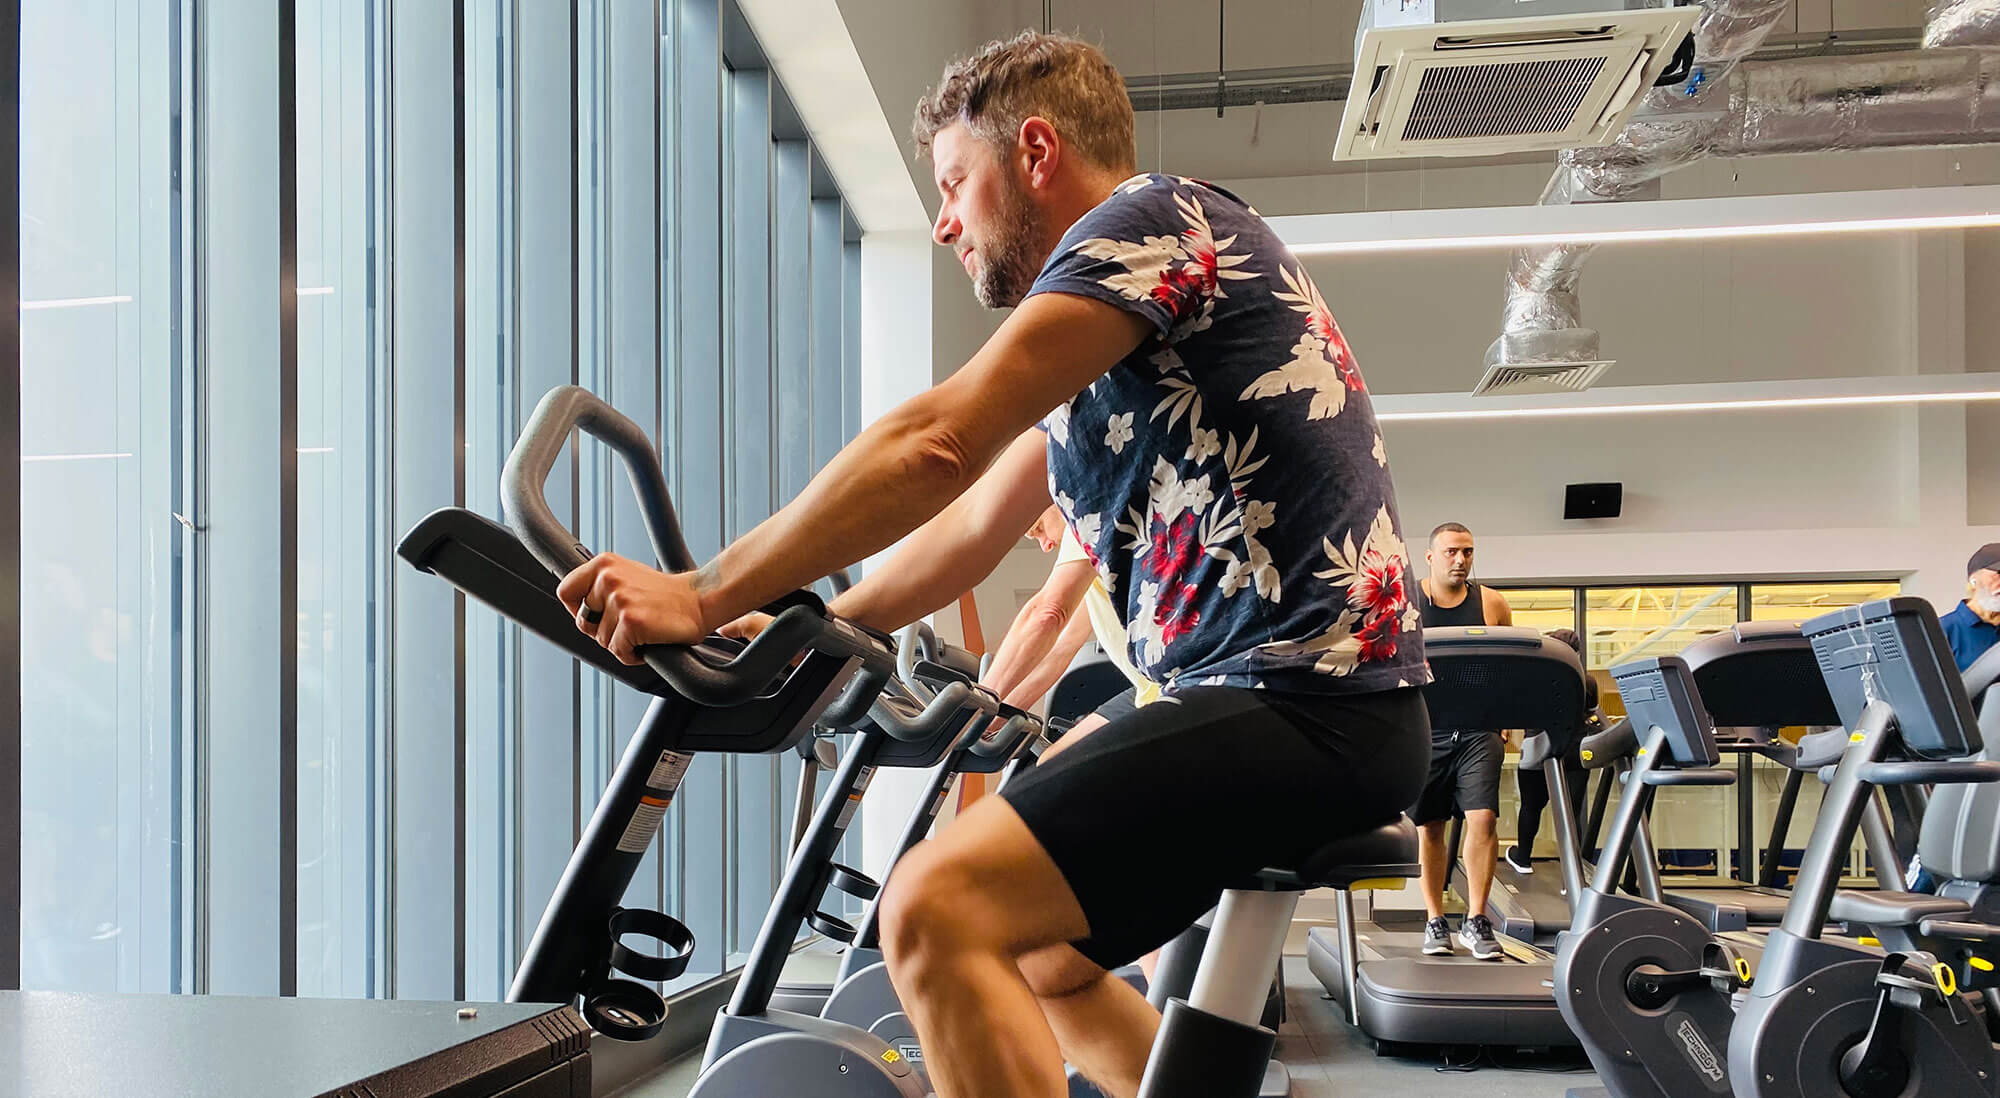 Image of a person on a bike in the gym at The Alan Higgs Centre